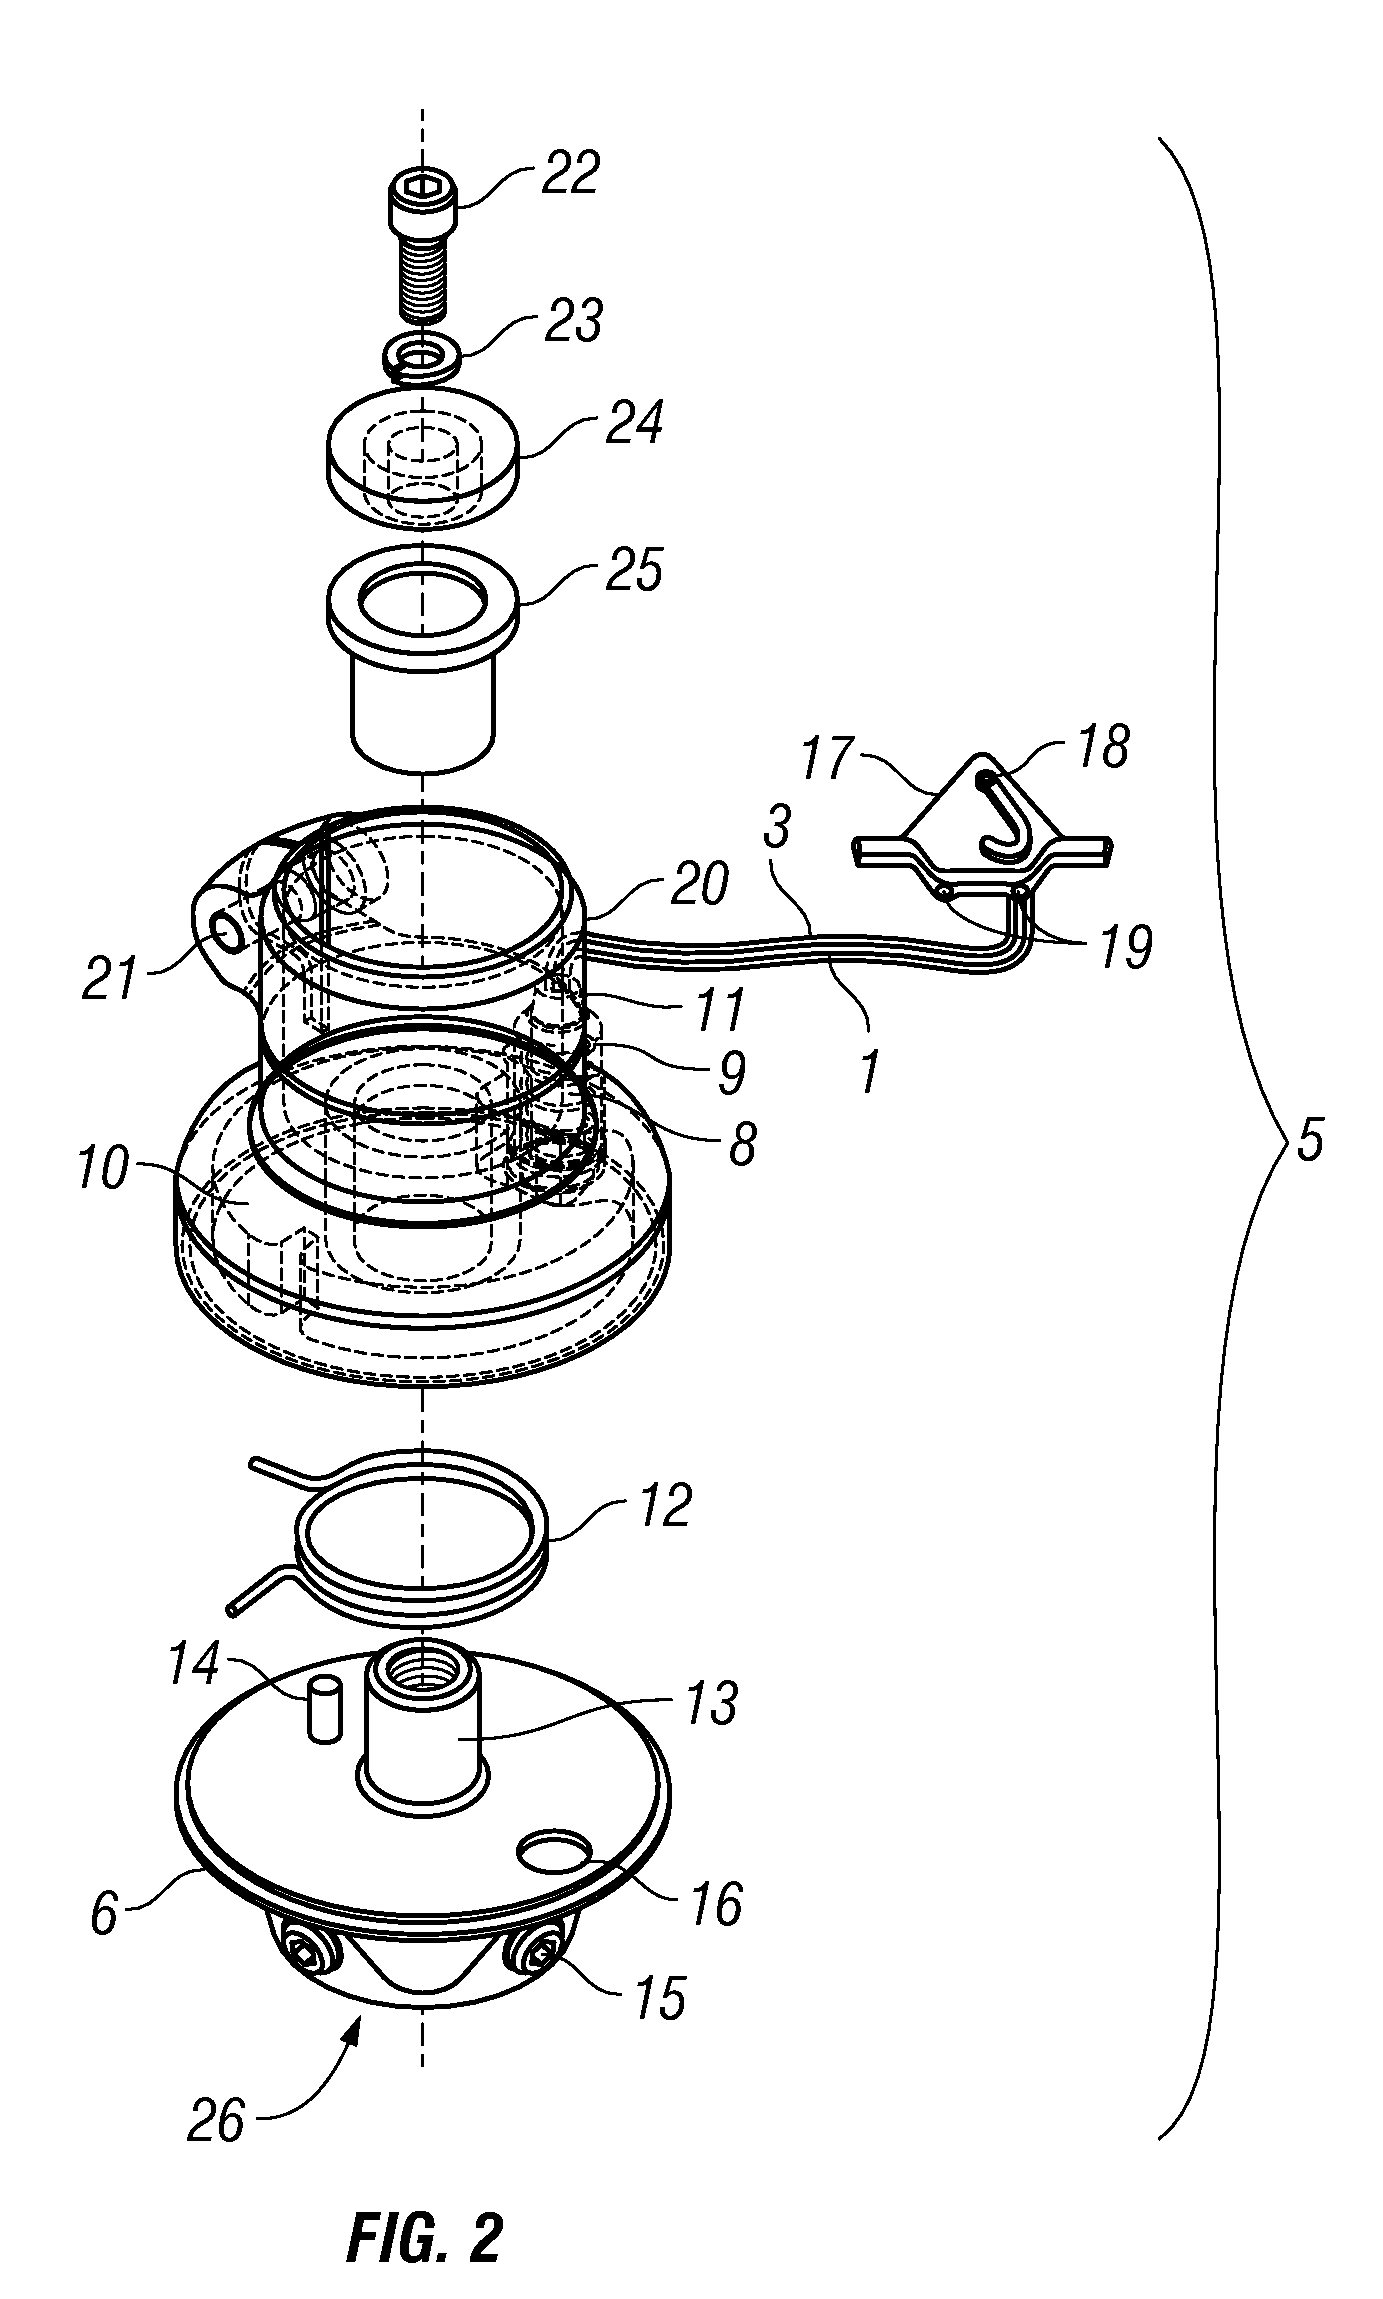 Adjustable tension prosthetic ankle rotatory device for lower limb apparatus